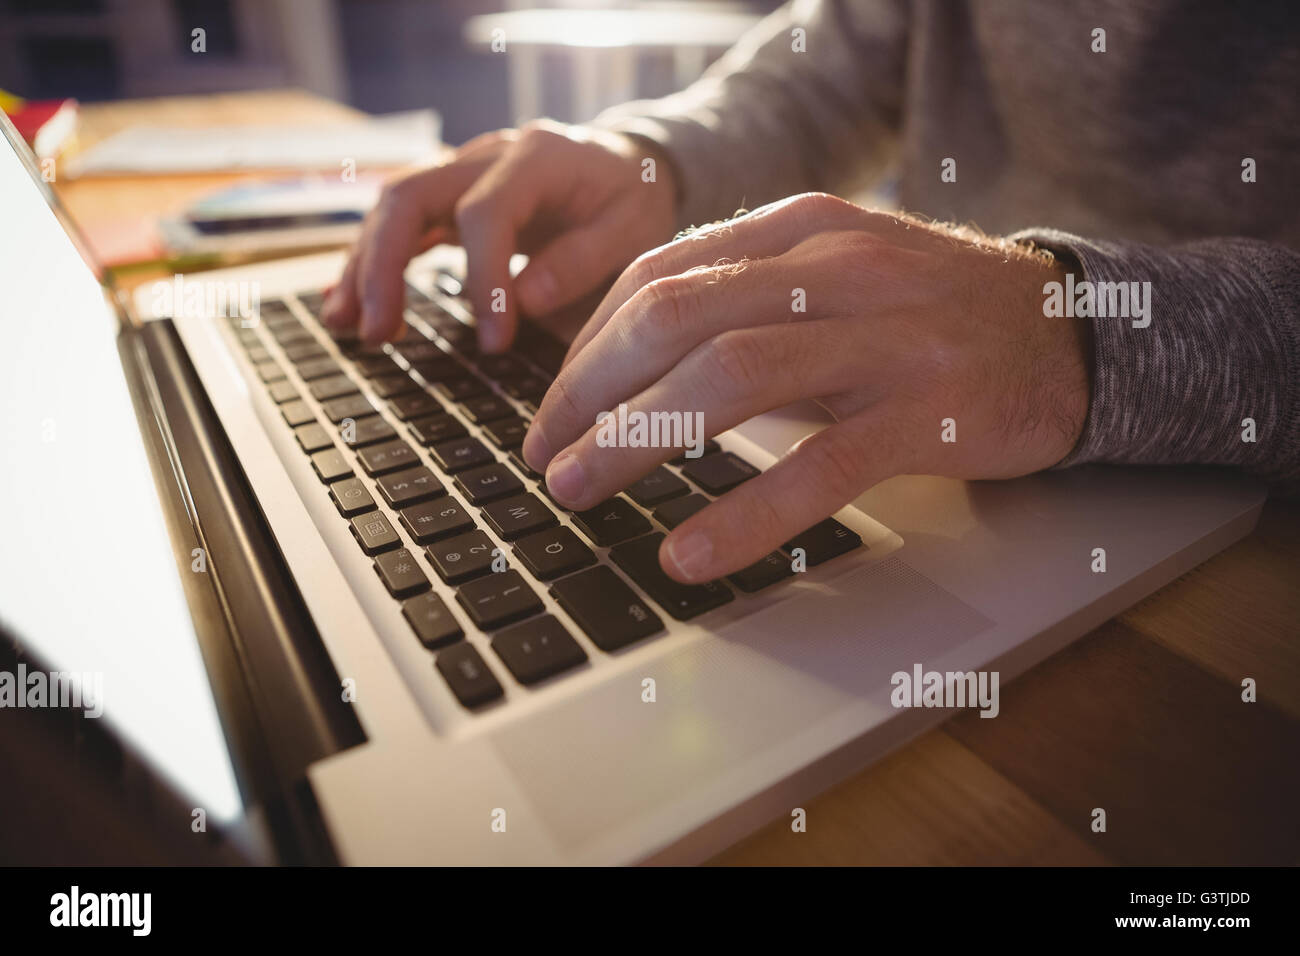 Hands typing on laptop Stock Photo